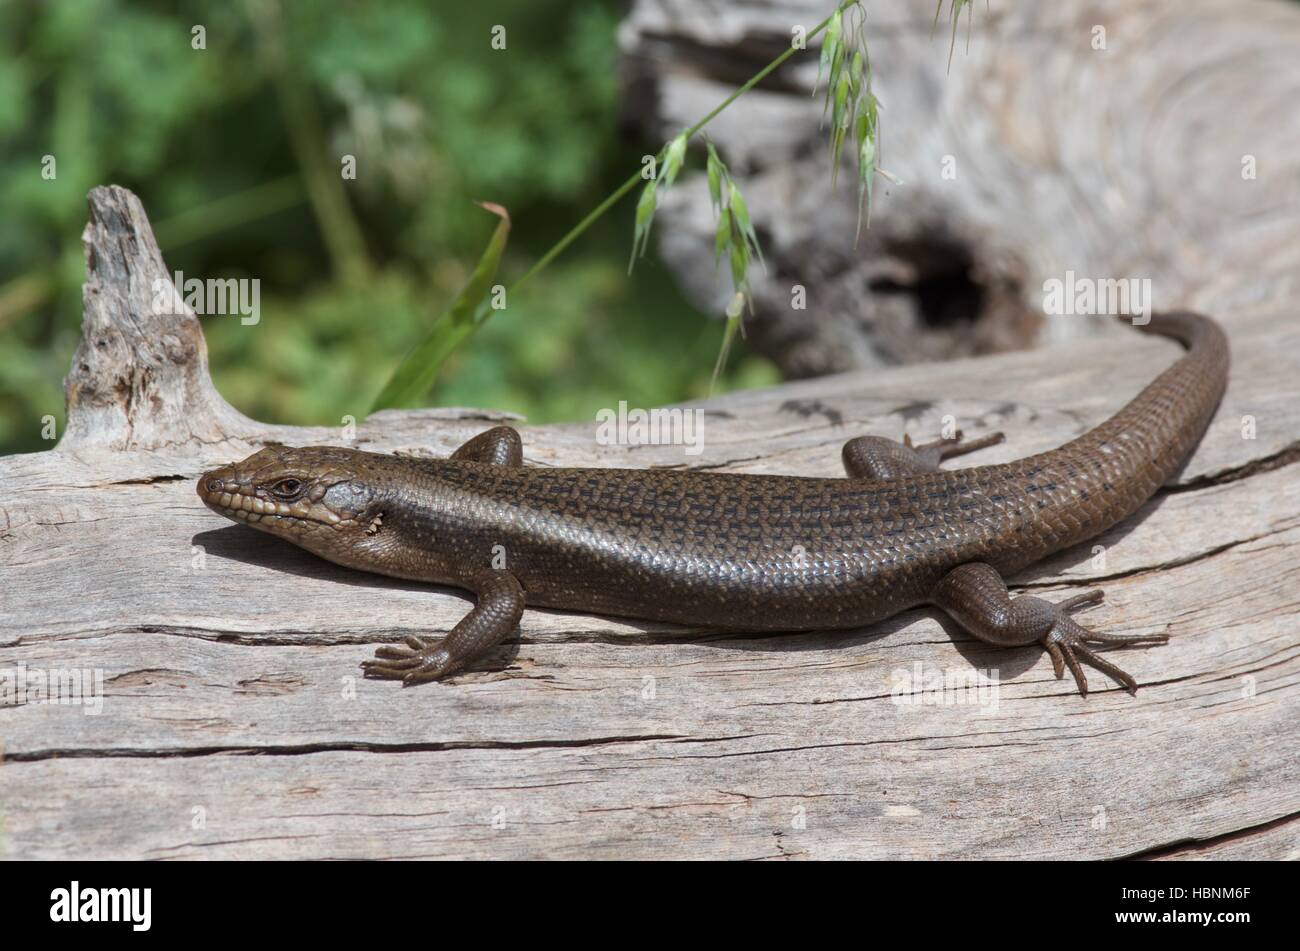 A Tree Skink or Rock Skink (Egernia striolata) stretched out on a log in Flinders Ranges National Park, South Australia Stock Photo